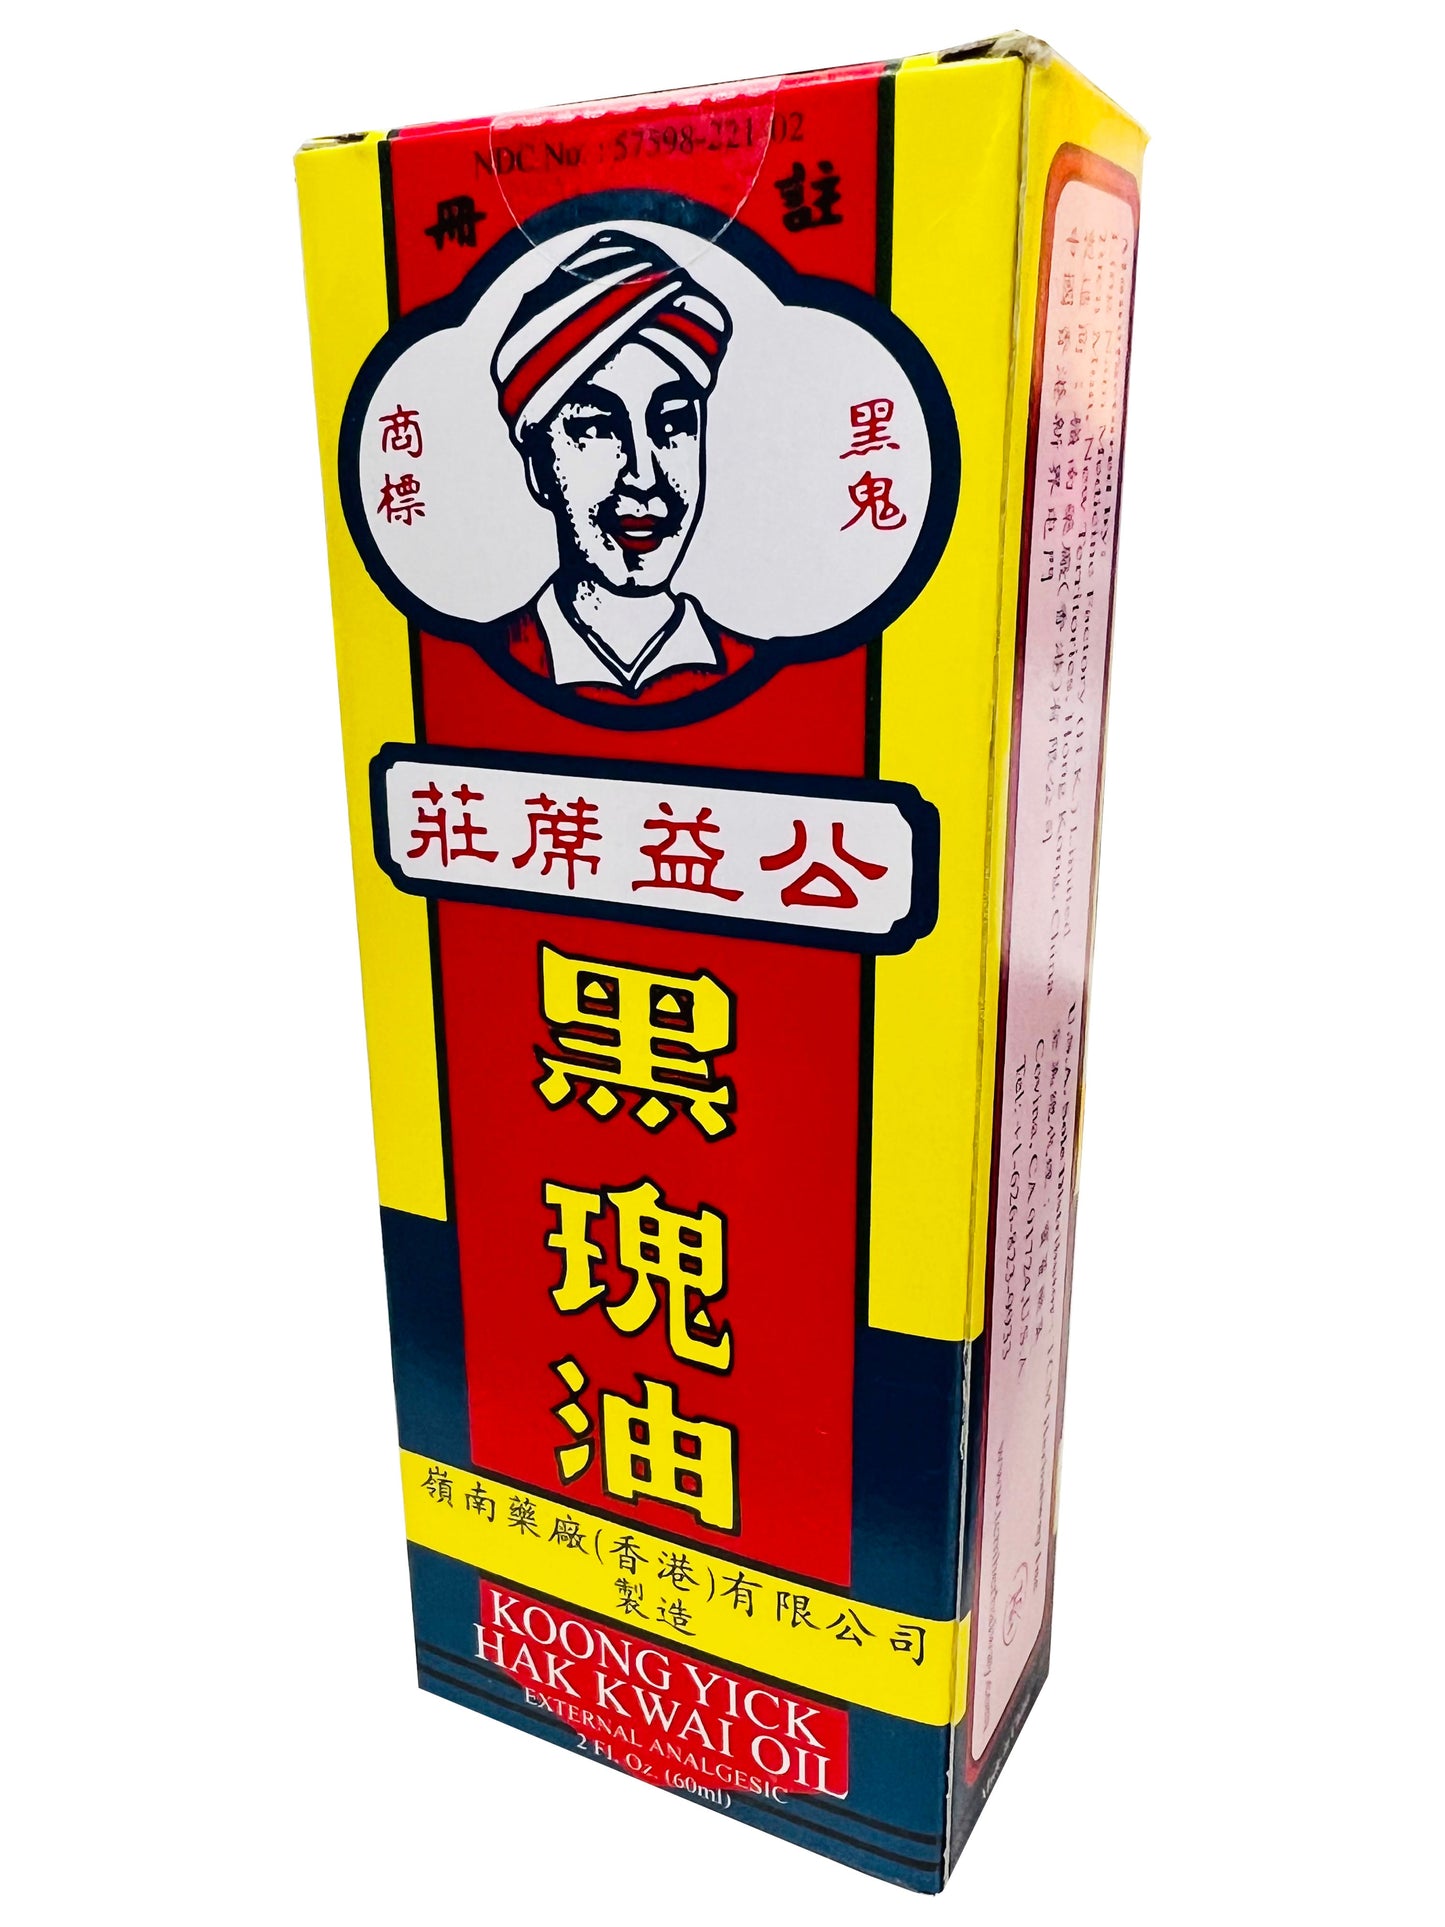 KOONG YICK BRAND Hak Kwai (Black Ghost Oil) Pain Relieving Oil -黑瑰油